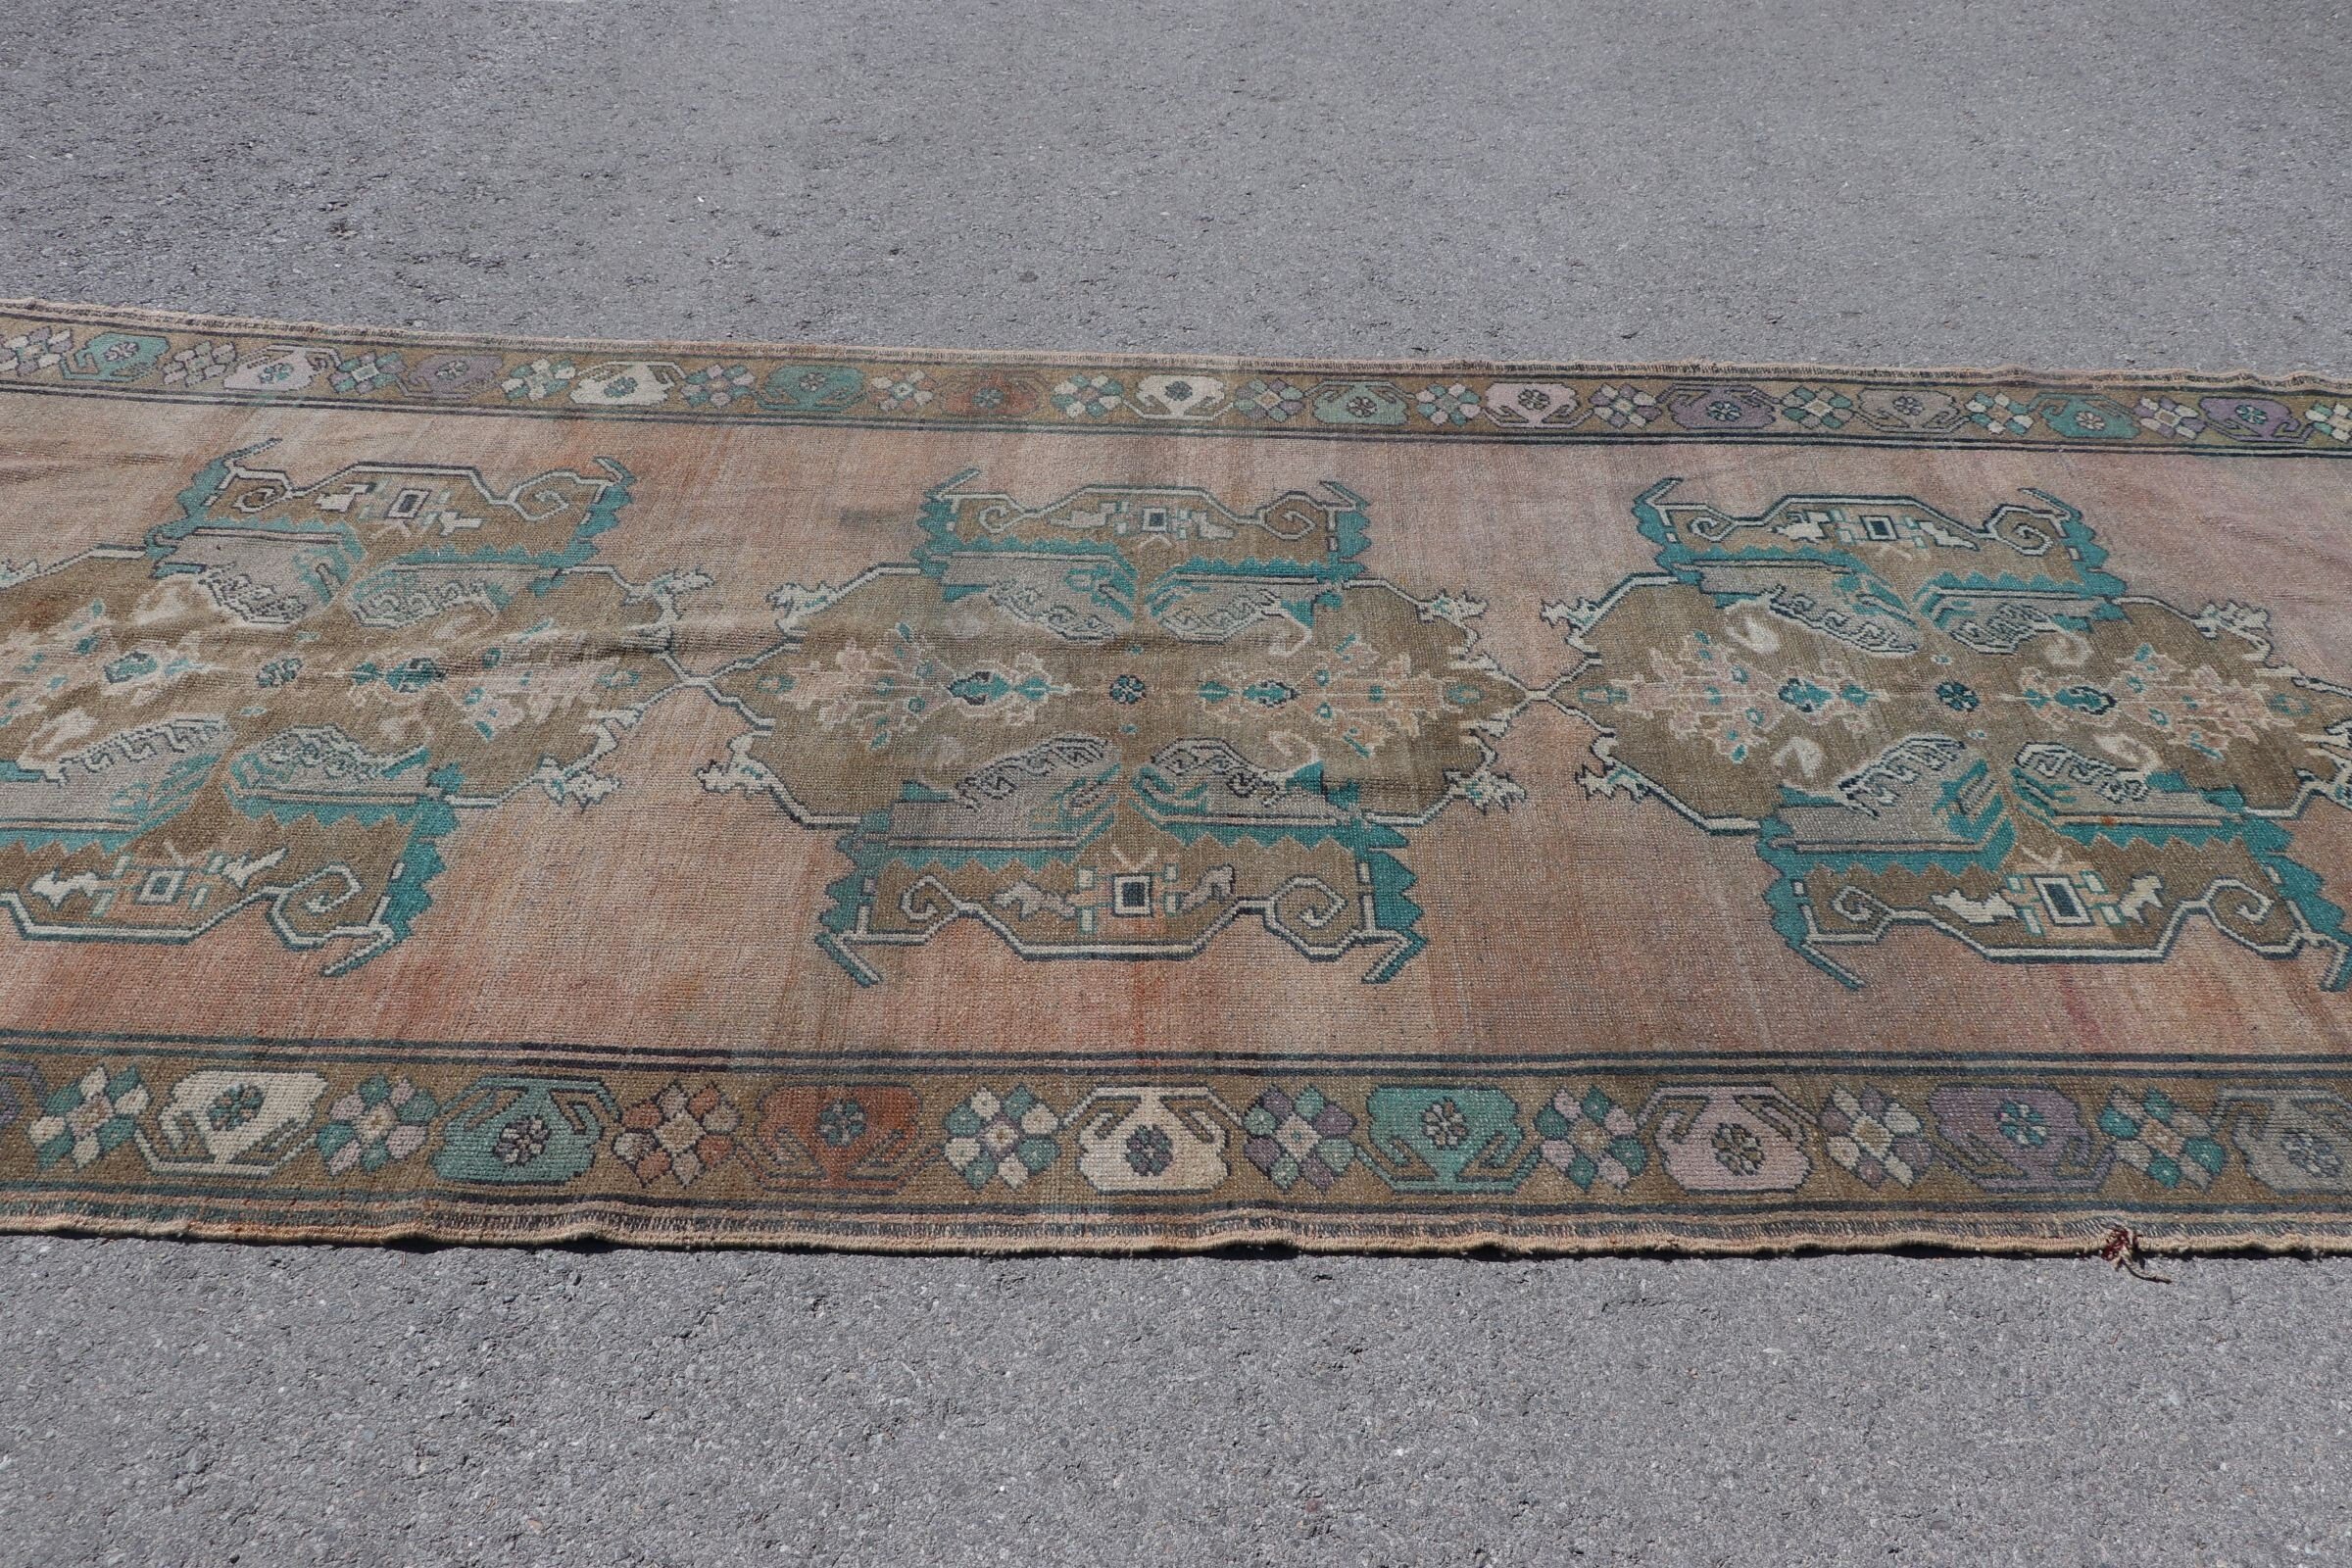 Pale Rug, Turkish Rug, Anatolian Rugs, Cool Rugs, 4.9x12.5 ft Runner Rugs, Kitchen Rug, Rugs for Stair, Vintage Rugs, Green Home Decor Rug